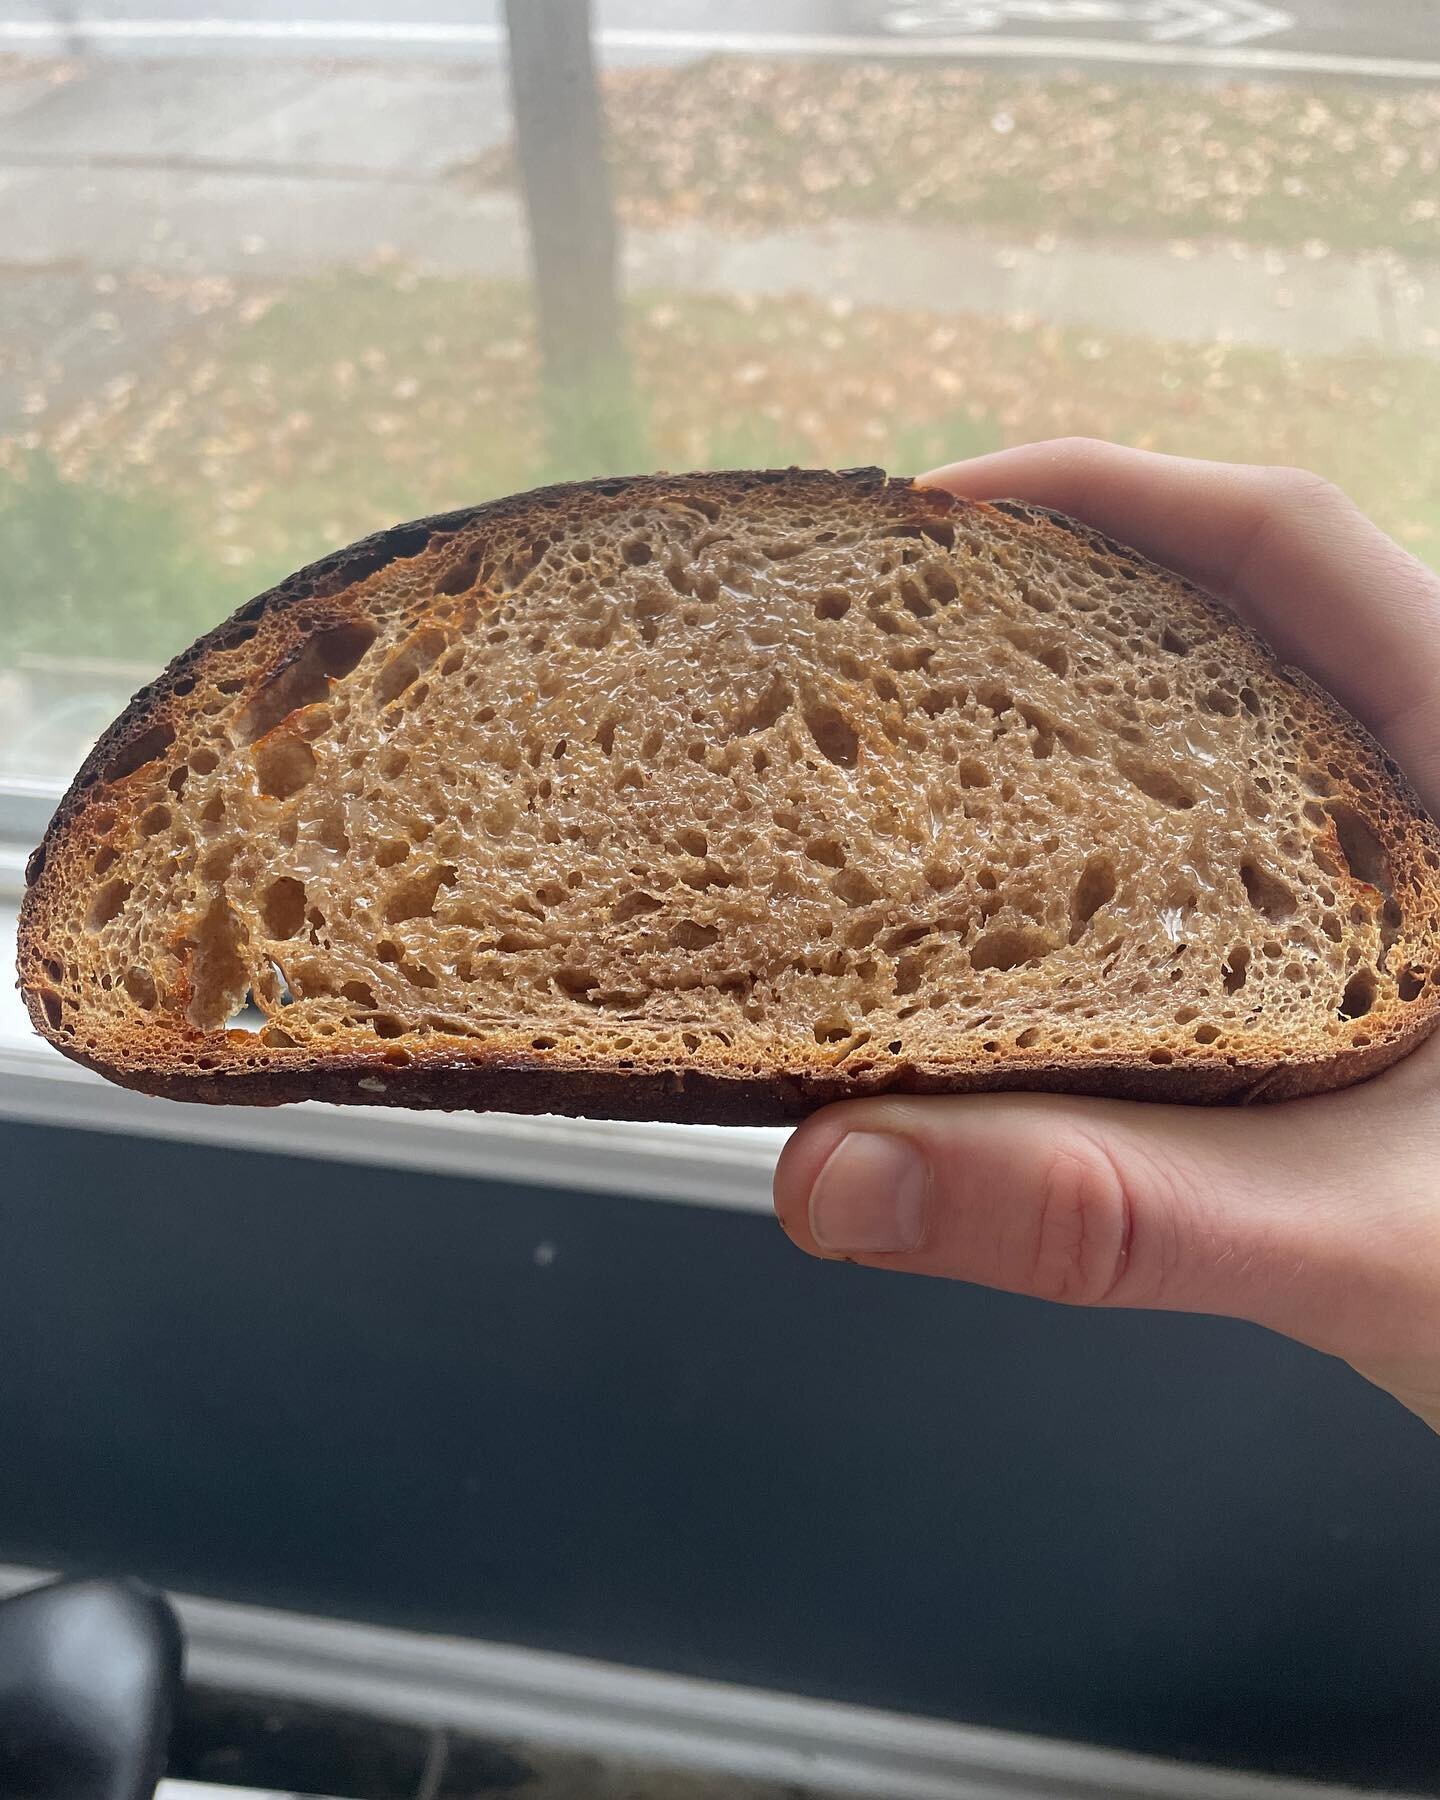 three-day old loaf, perfect for toast

this is the country bread, around 70% whole grain these days

big shout-out to @janiesmill for providing the best flour, from Illinois all the way out here in southwest Michigan. this loaf includes their spelt, 